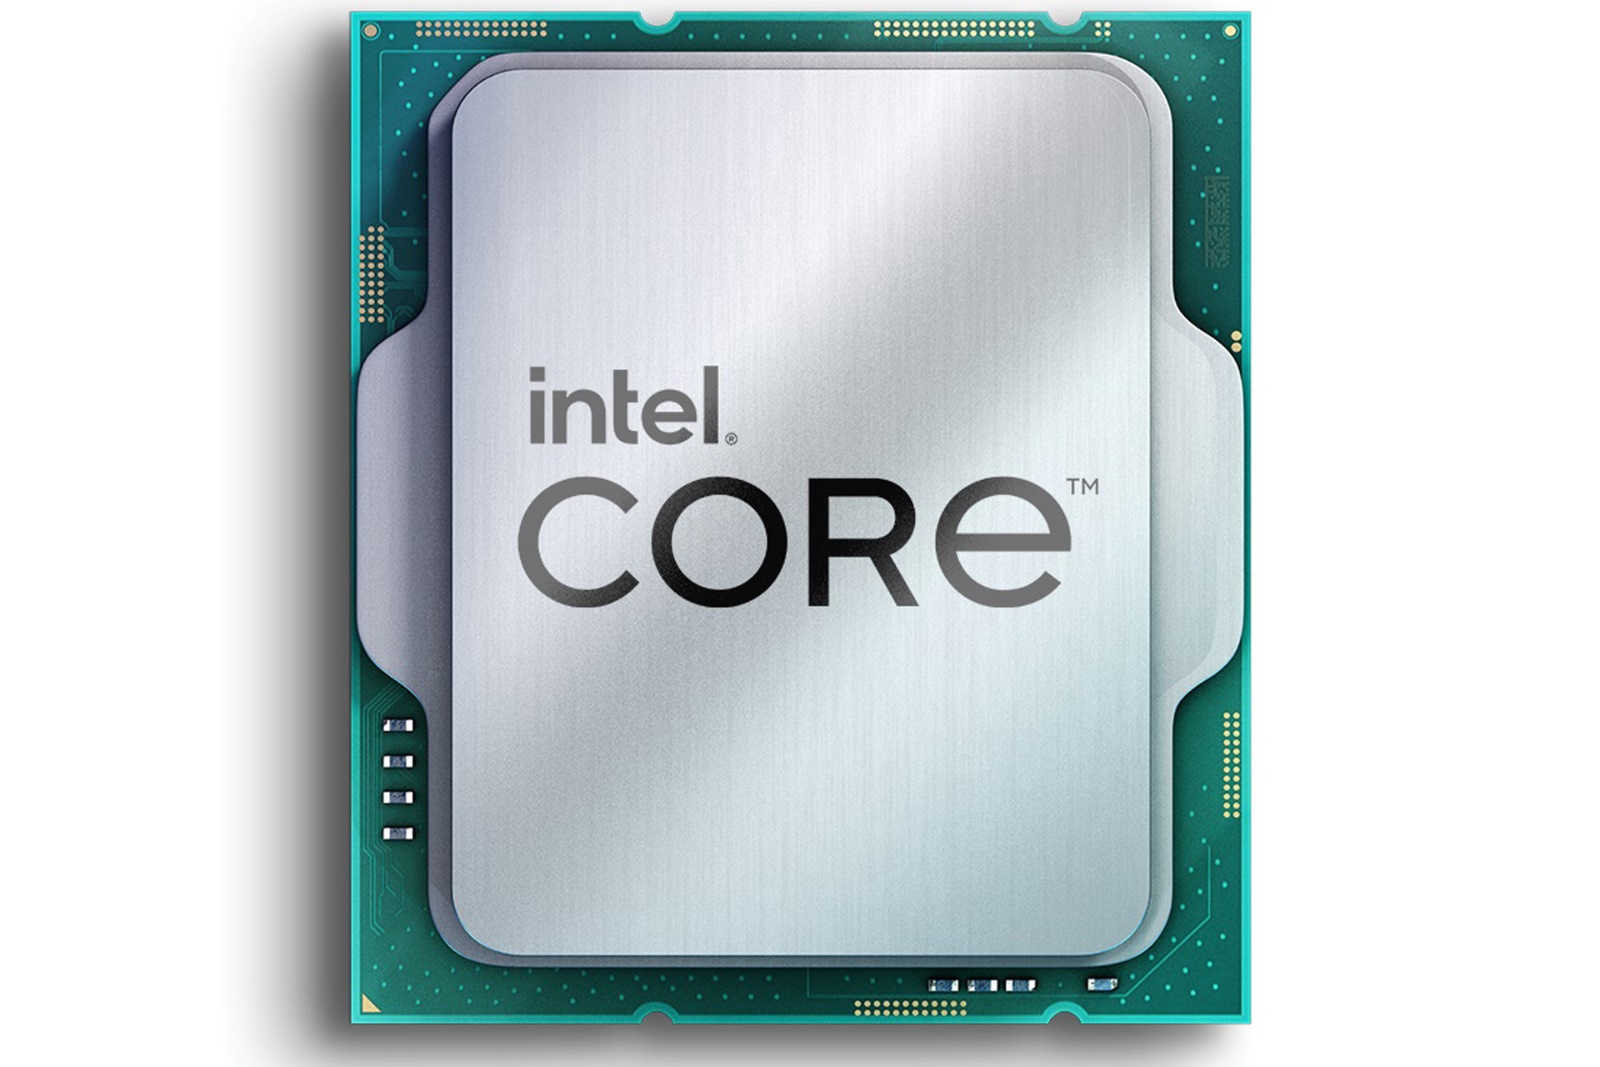 13th generation Intel Raptor Lake CPU processor from the top view